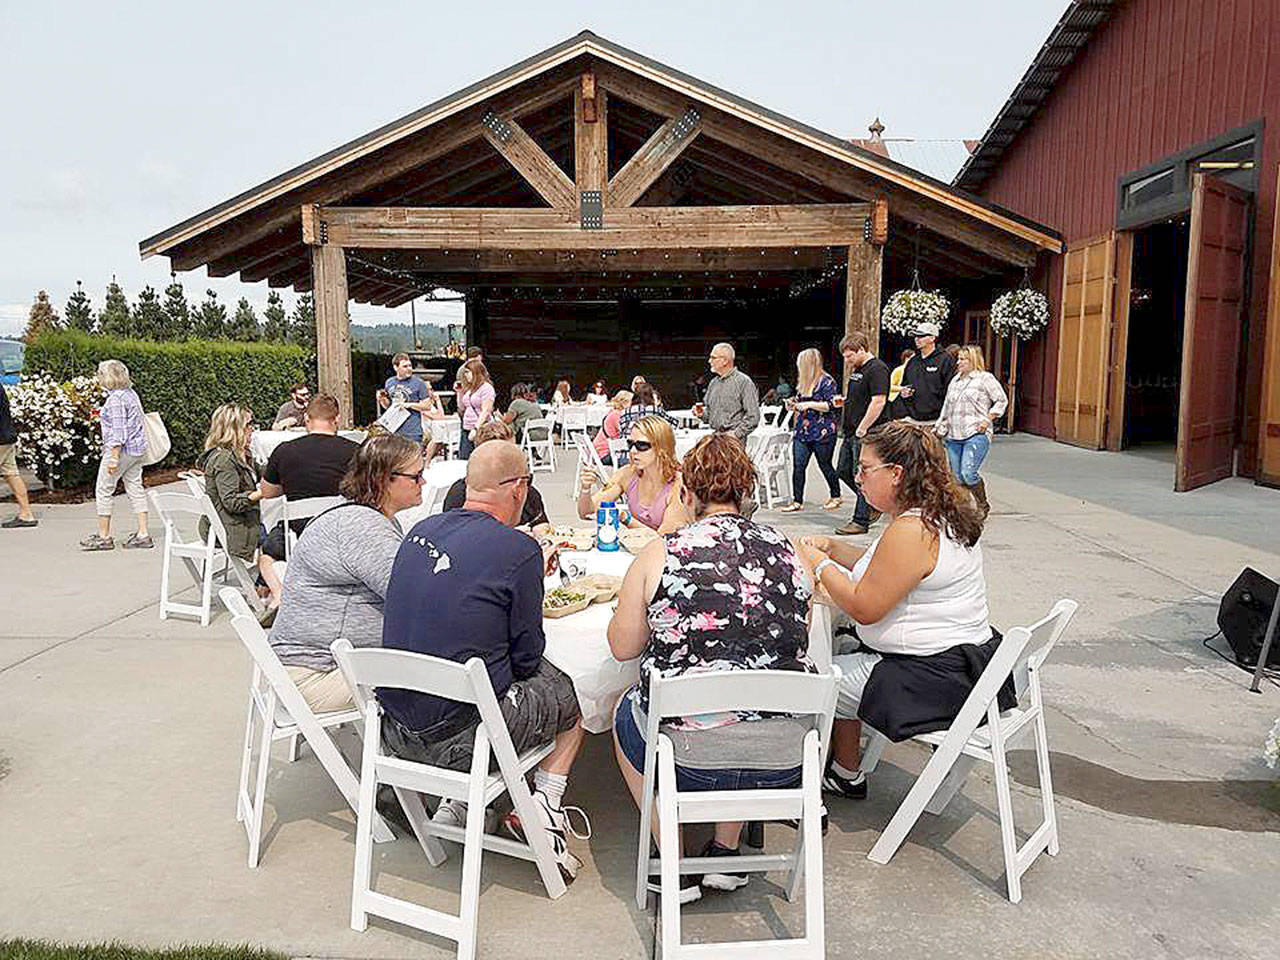 The fifth annual Snohomish Hard Cider Festival is Aug. 11 at Thomas Family Farm in Snohomish. (Contributed photo)